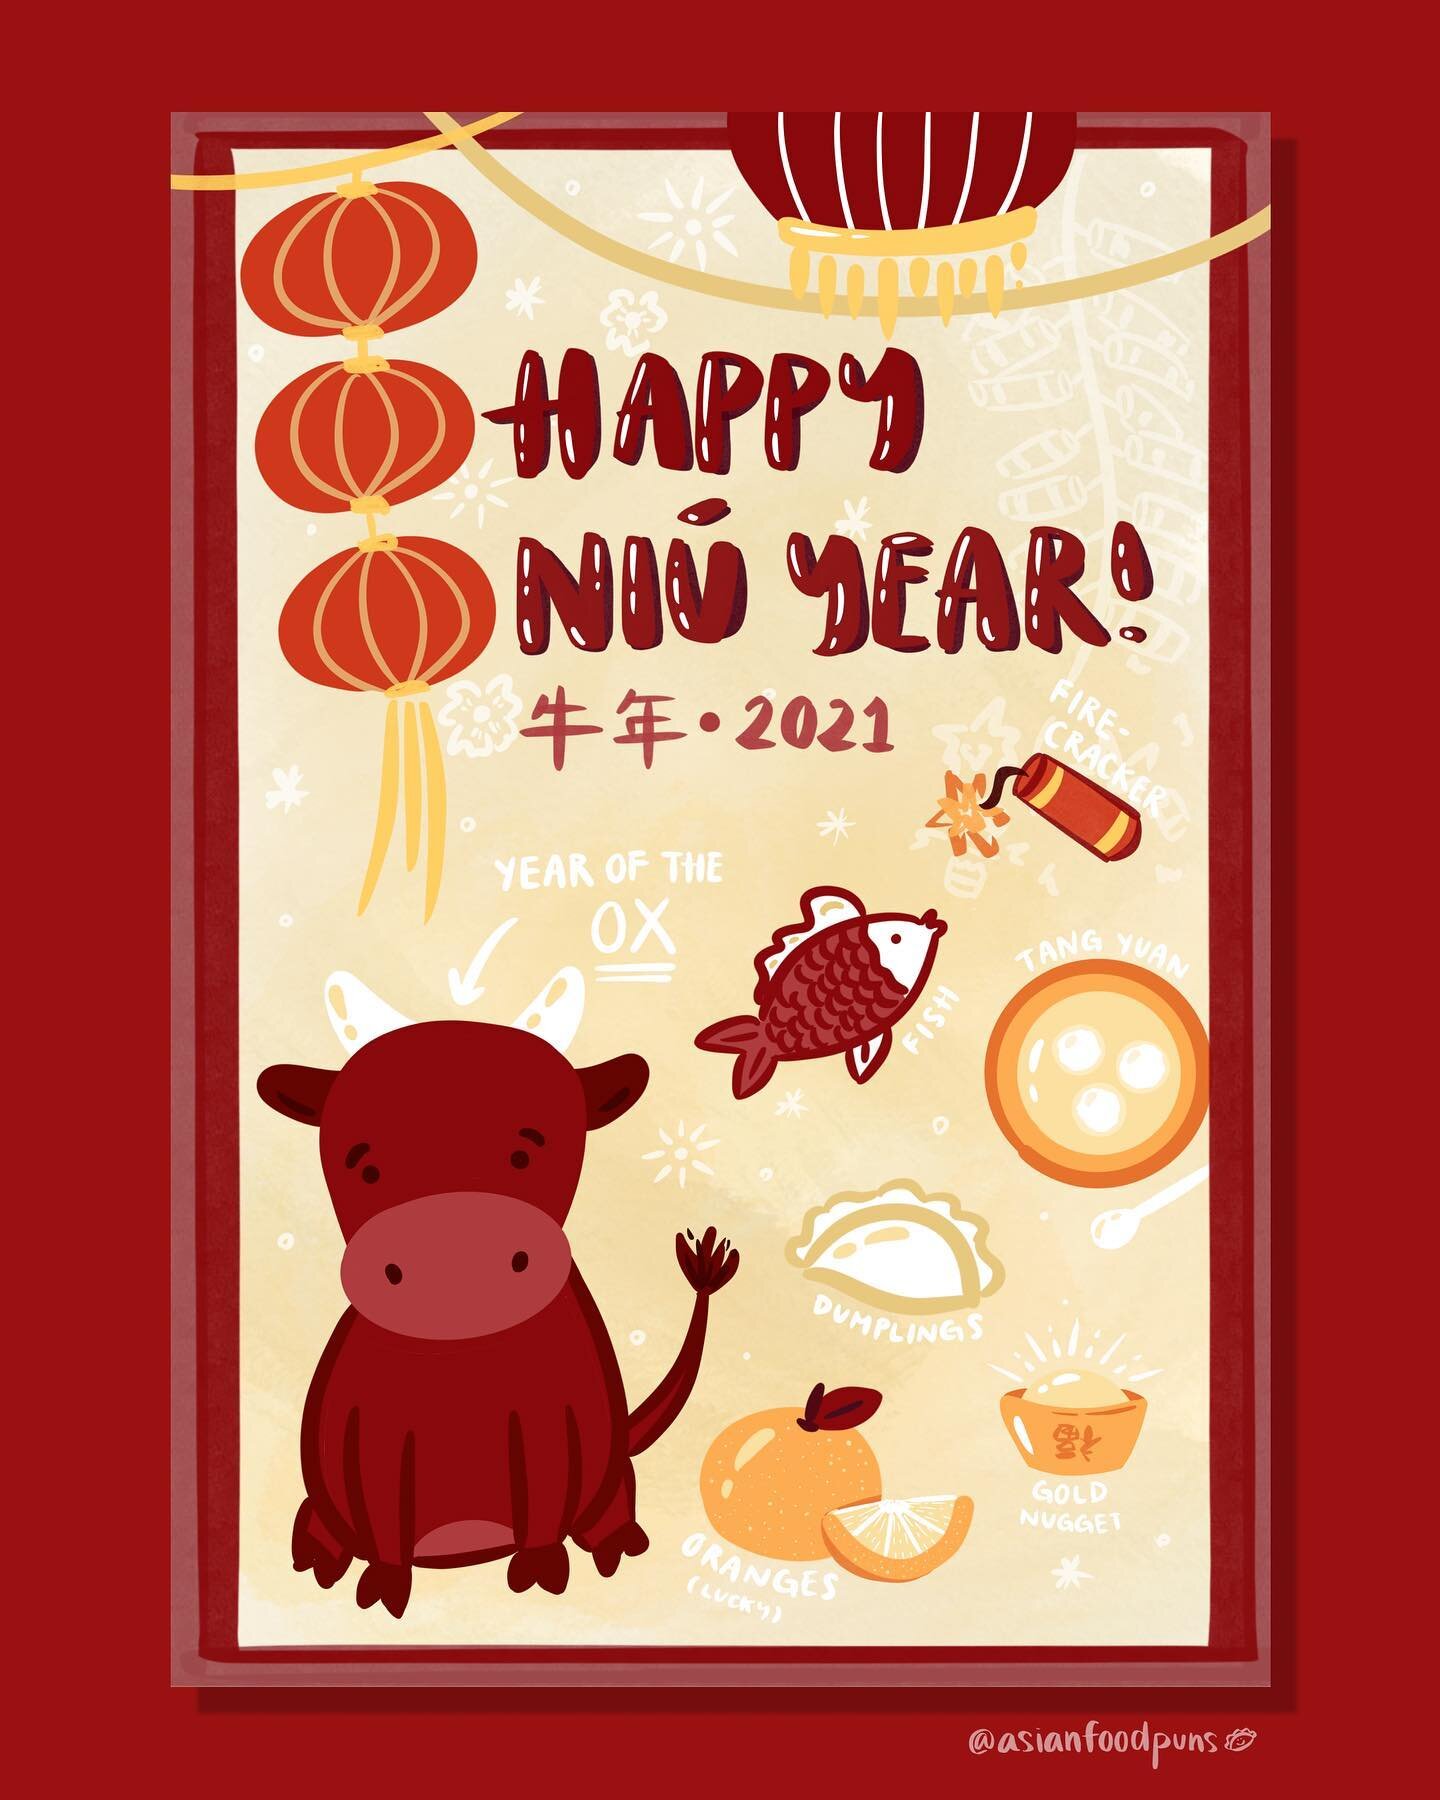 Happy Lunar New Year! 新年快乐 🎉🏮🐮🧧🎊
⠀
This is the year of the ox! 牛 (niú) is the Chinese word for cow. Normally, we&rsquo;d celebrate with family but that&rsquo;s a bit harder this year. We&rsquo;ll still make dumplings though 🥟🥢💯 (hot take, I&